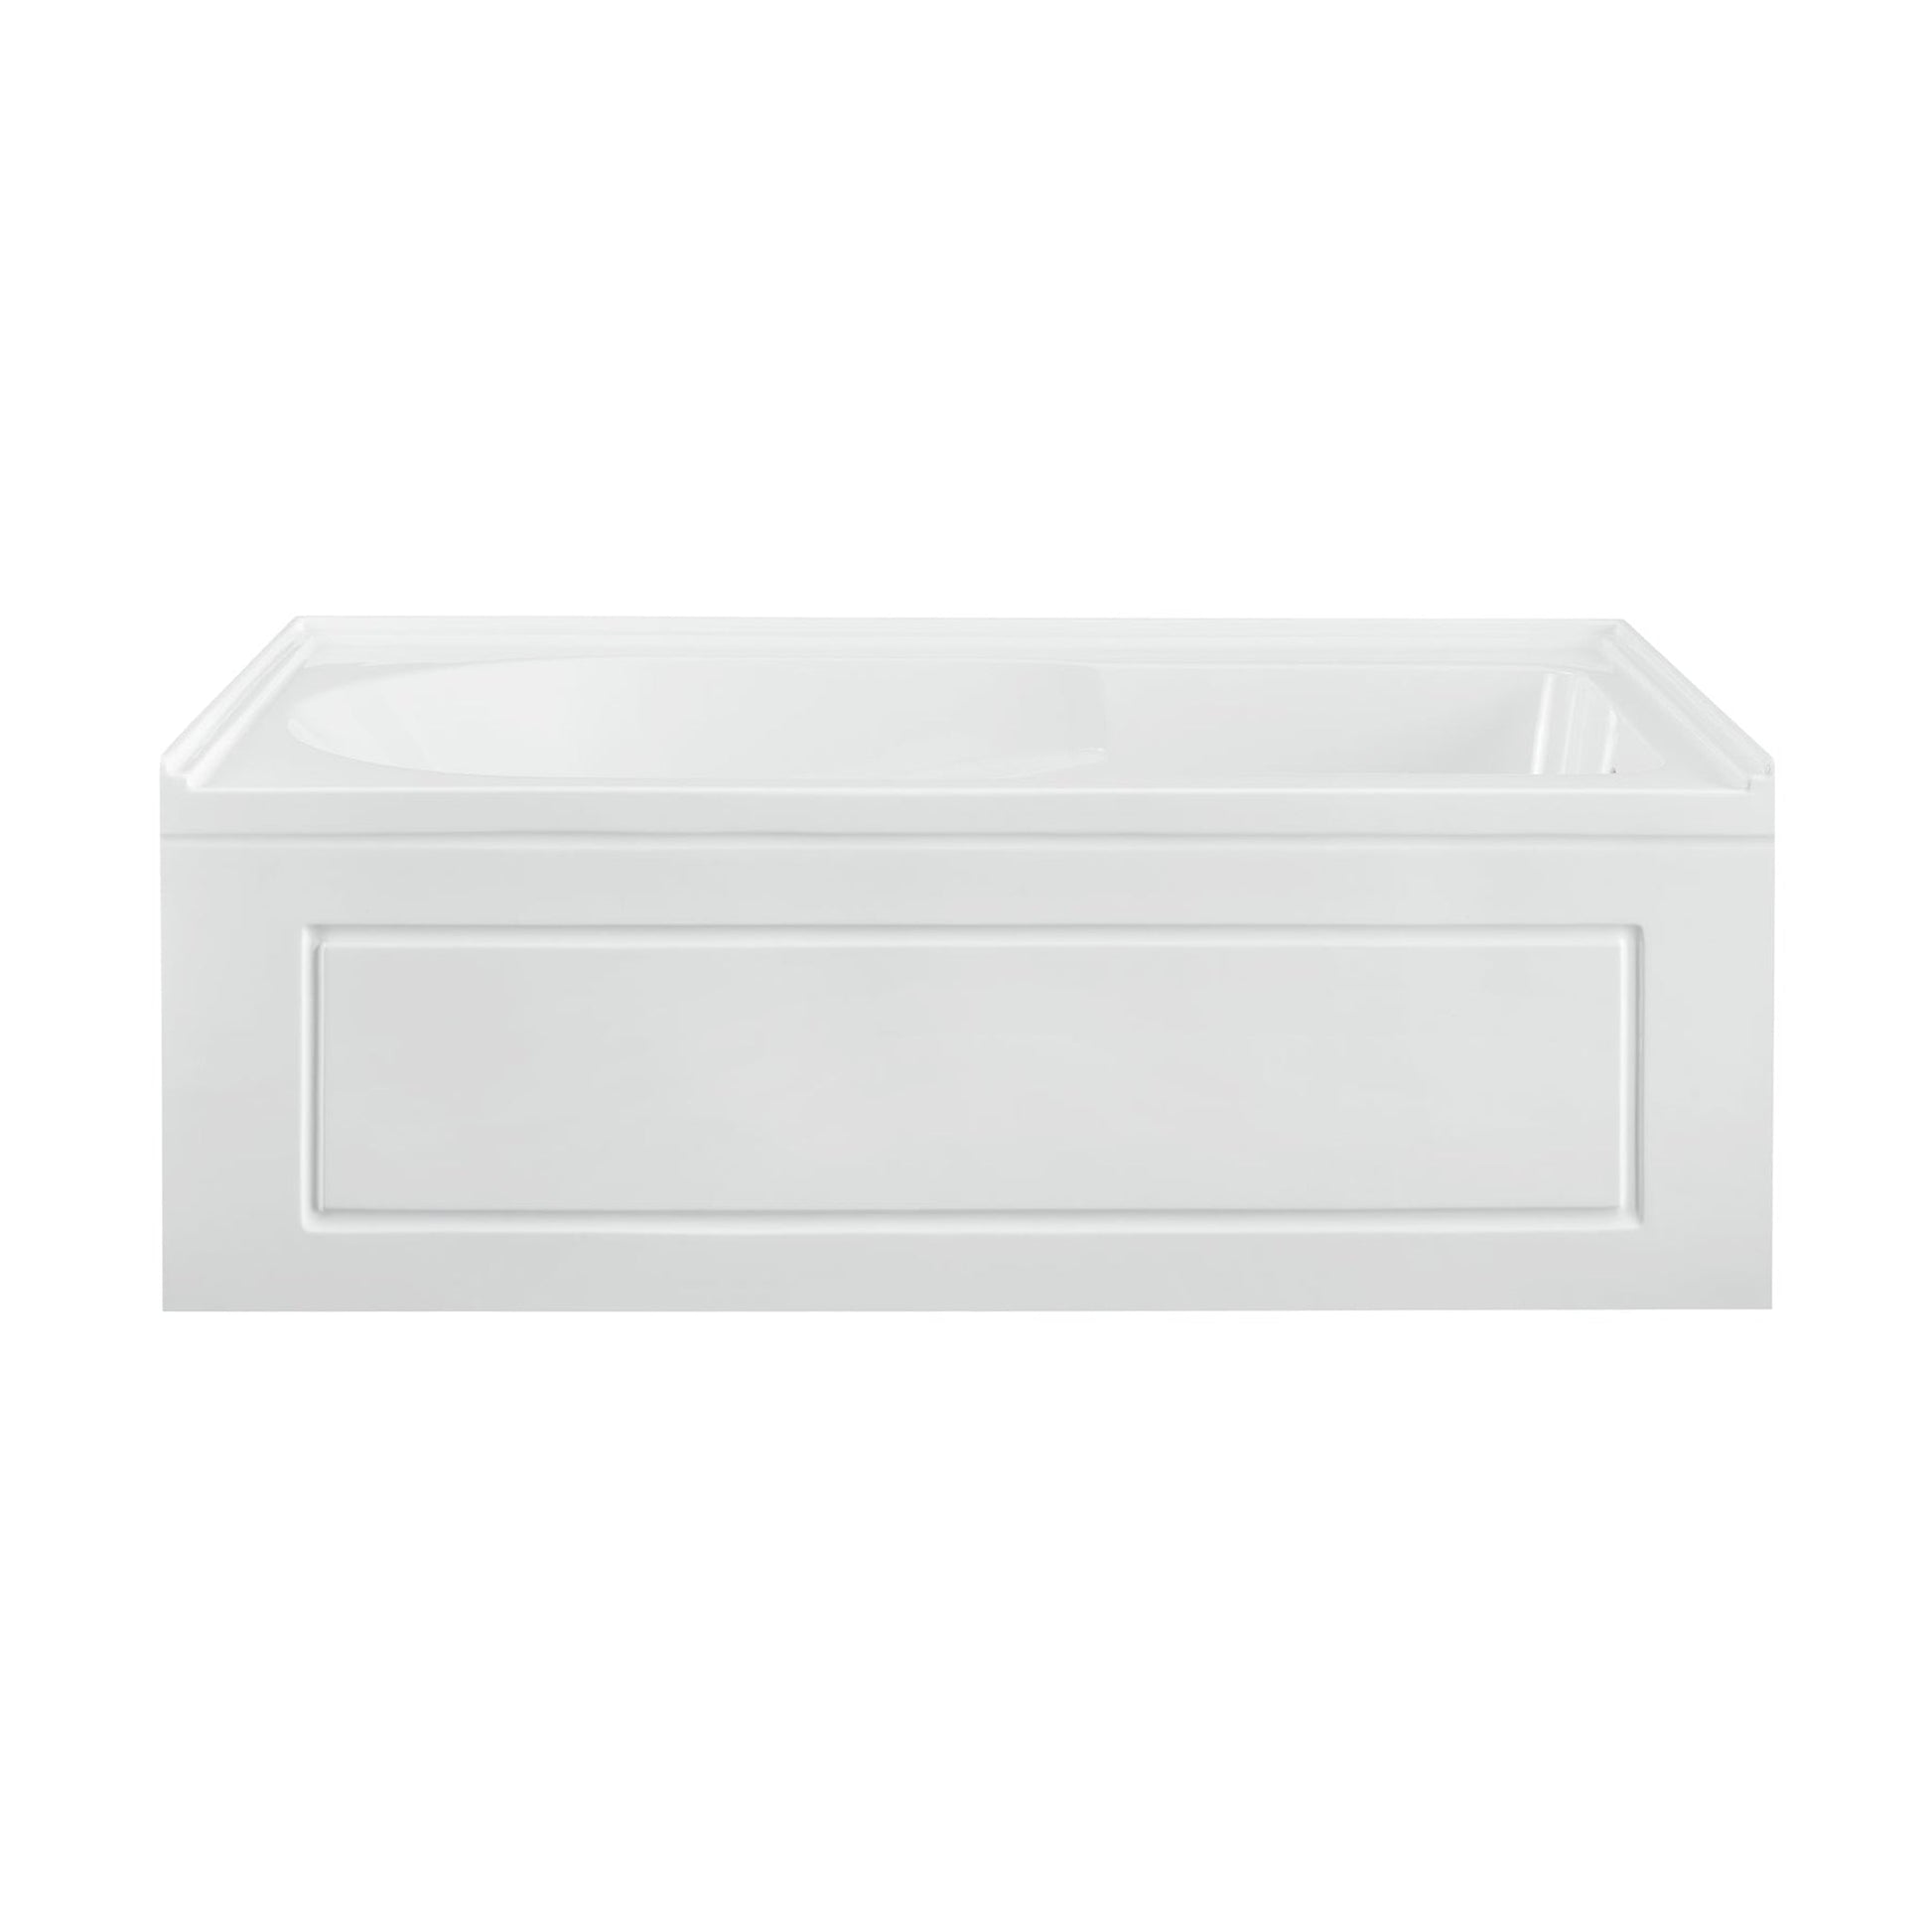 Swiss Madison Concorde 60" x 32" Glossy White Right-Hand Drain Alcove Bathtub With Integrated Armrest and Built-In Flange & Apron Front